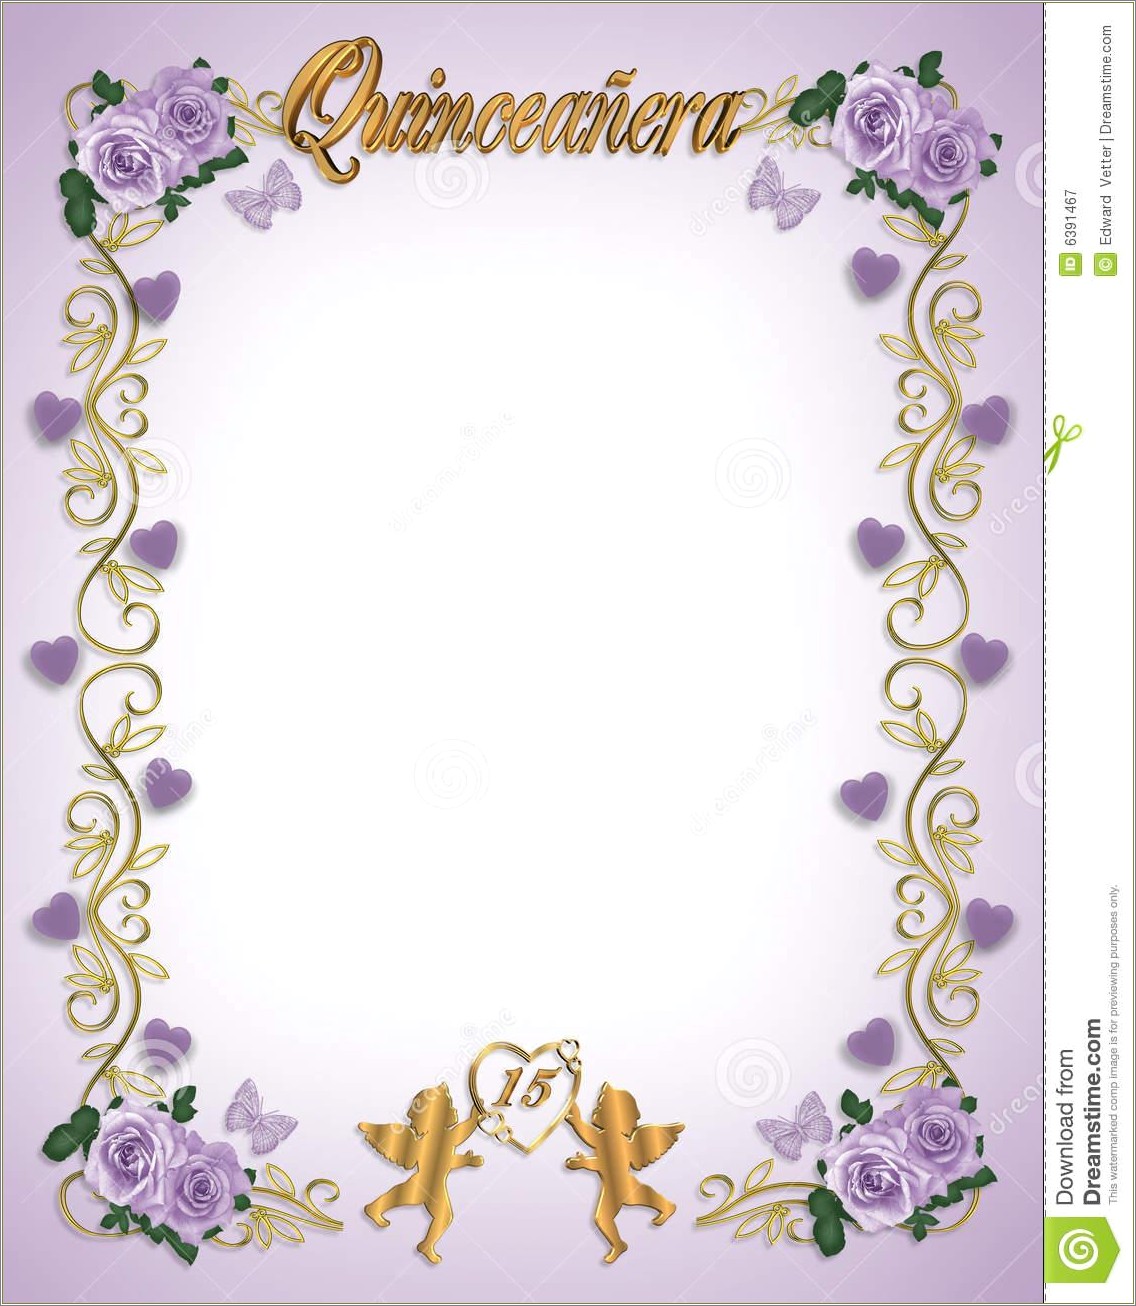 Free Quinceanera Template With A Silver Border